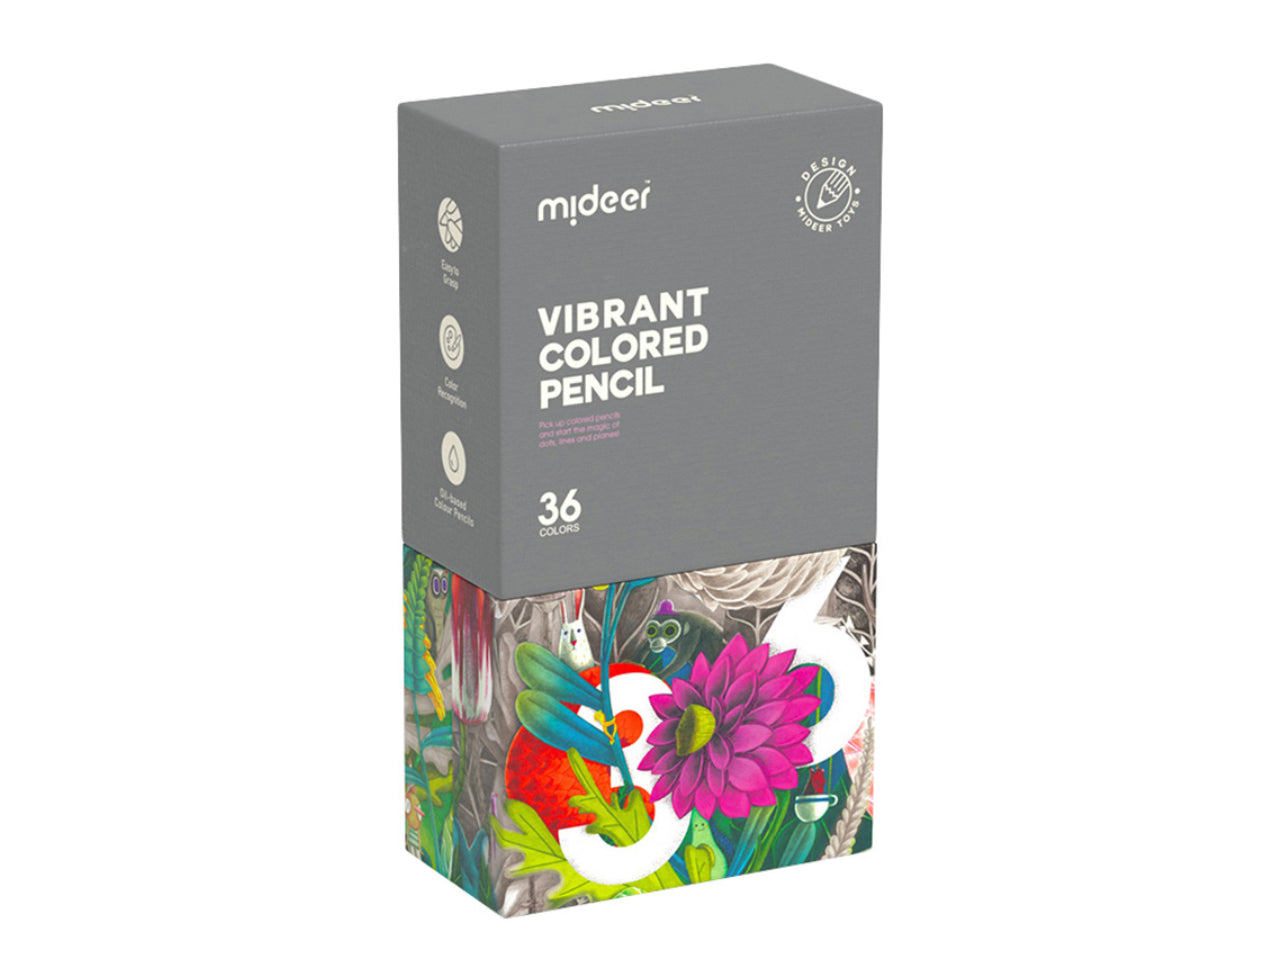 Vibrant Colored Pencil - 36 Colors Mideer